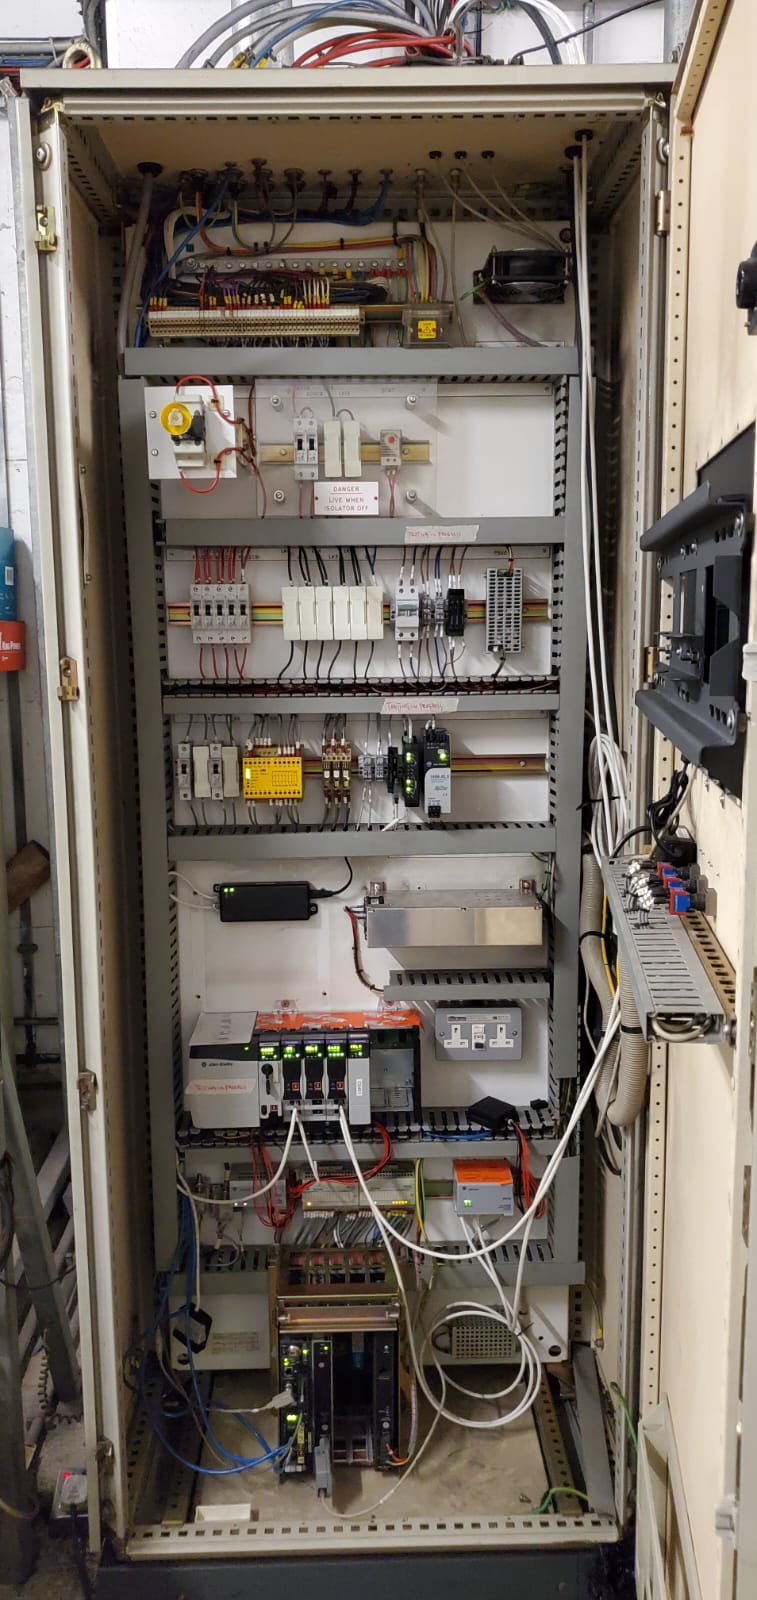 Internal View of CHEPLC PLC Panel During Testing & Commissioning (Typical)